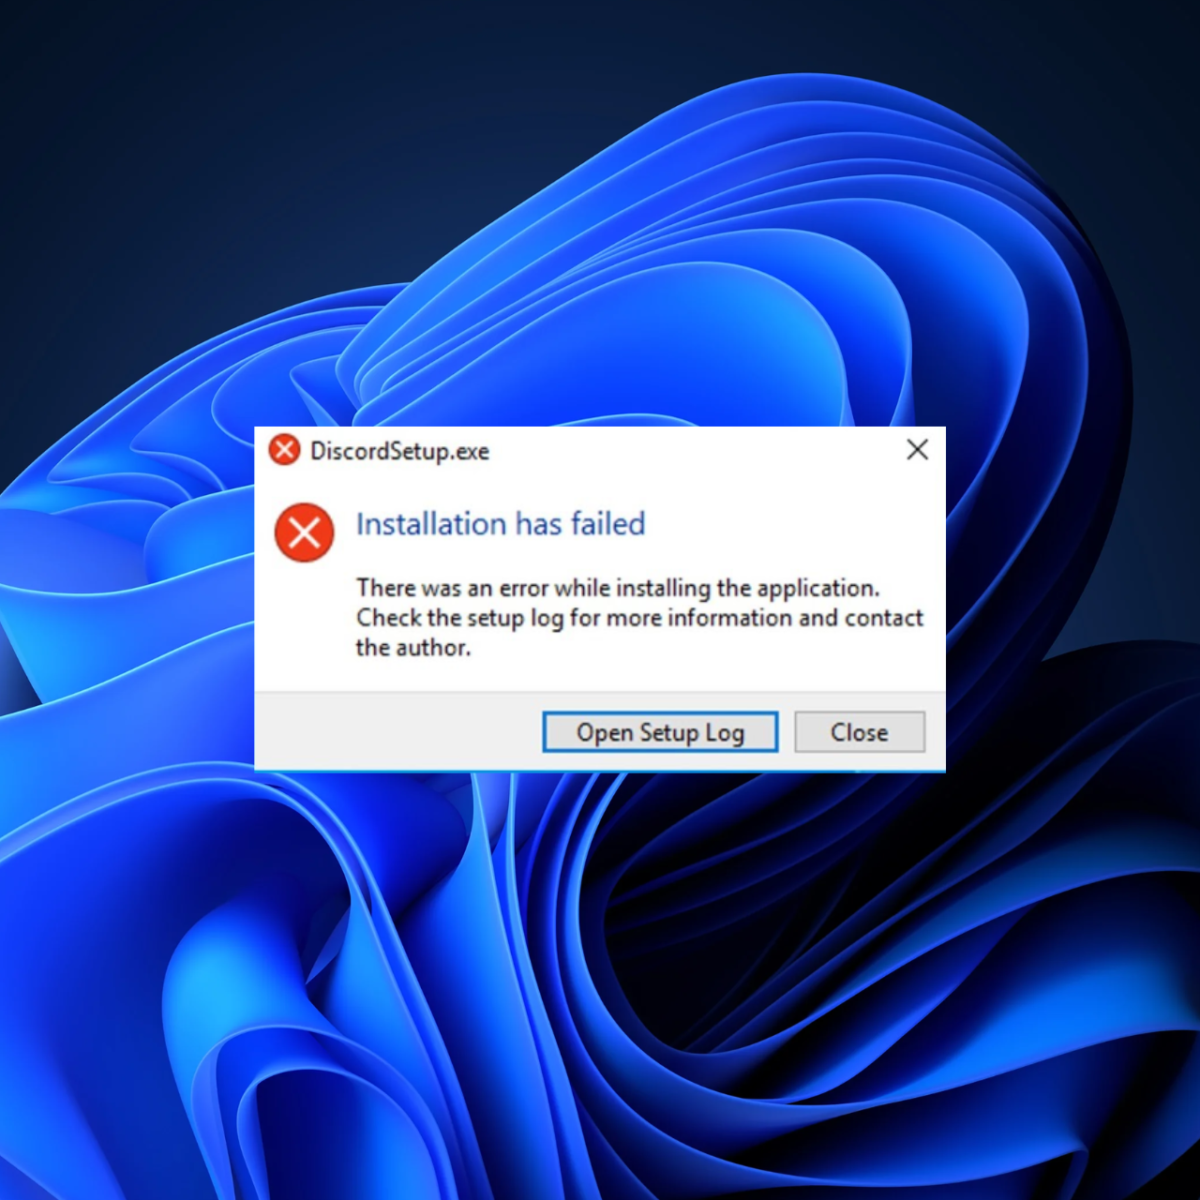 Discord Update Failed – How to Fix the Error on a Windows 10 PC